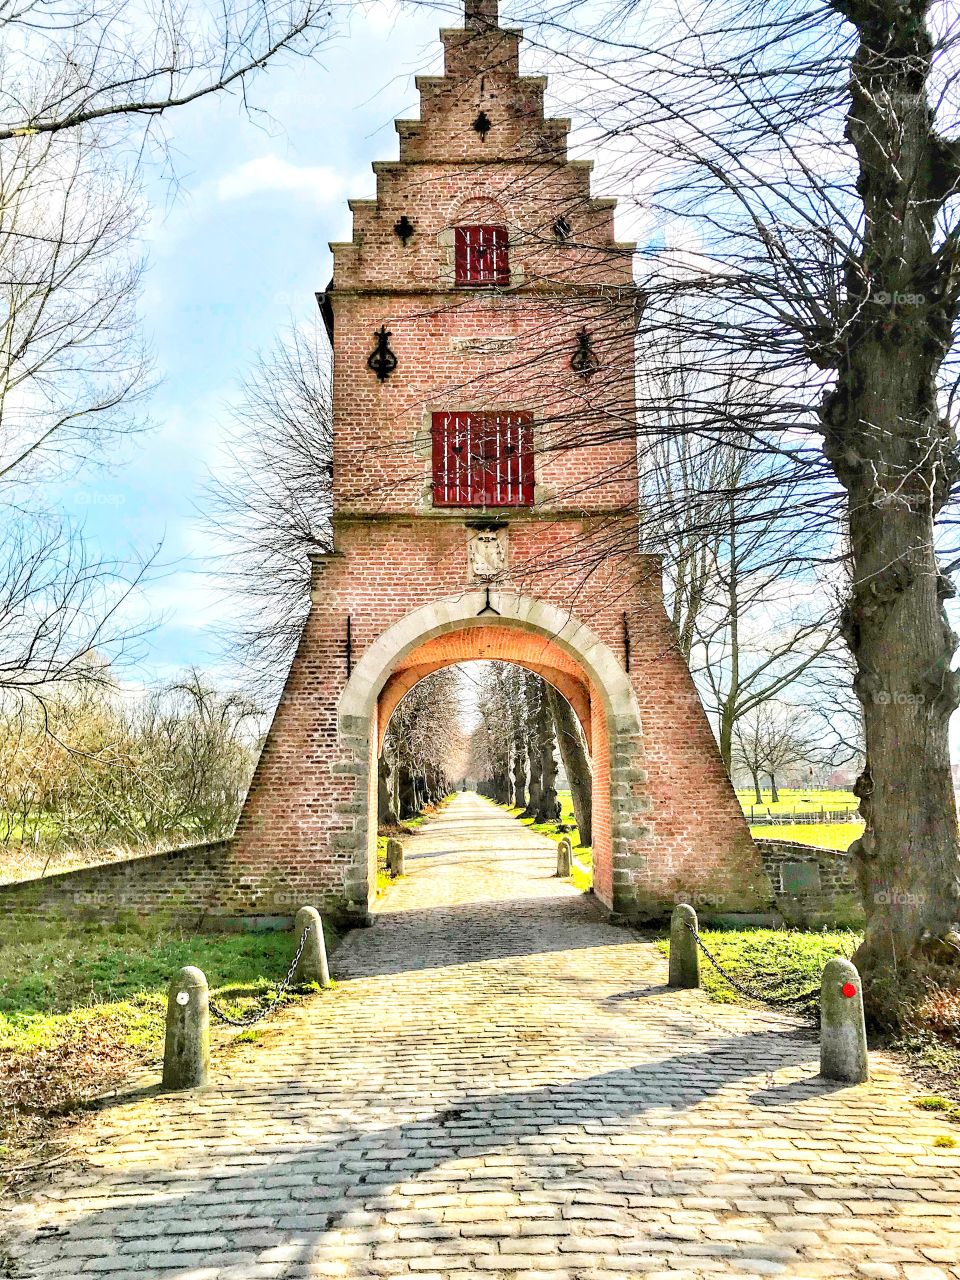 Entry to the Castle of Hooidonk near Ghent, Belgium